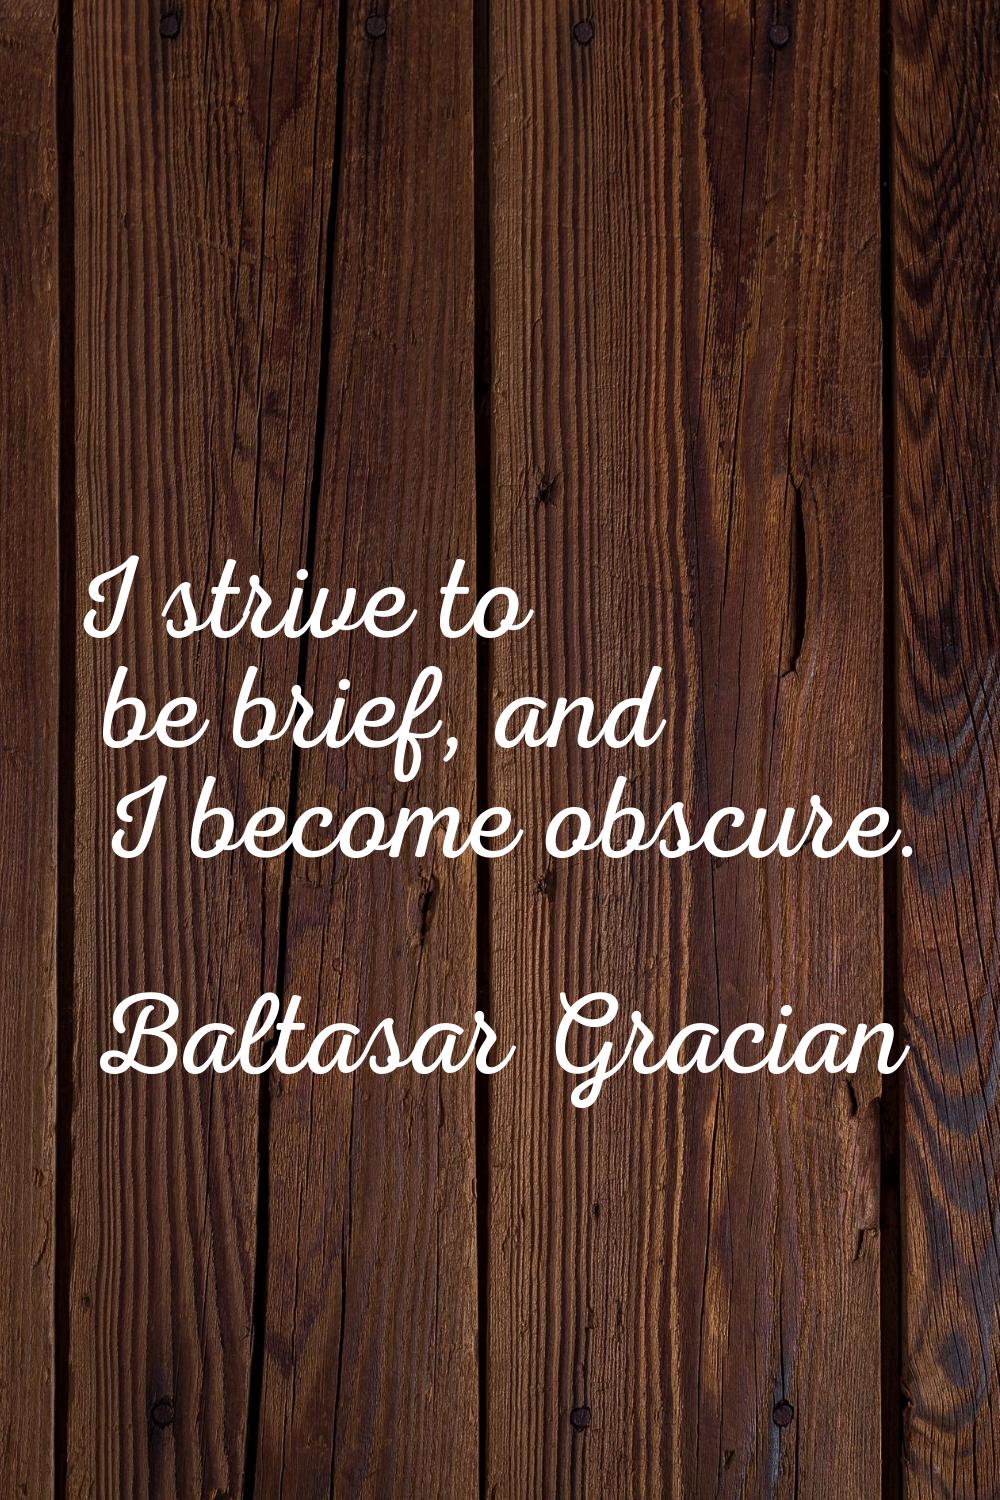 I strive to be brief, and I become obscure.